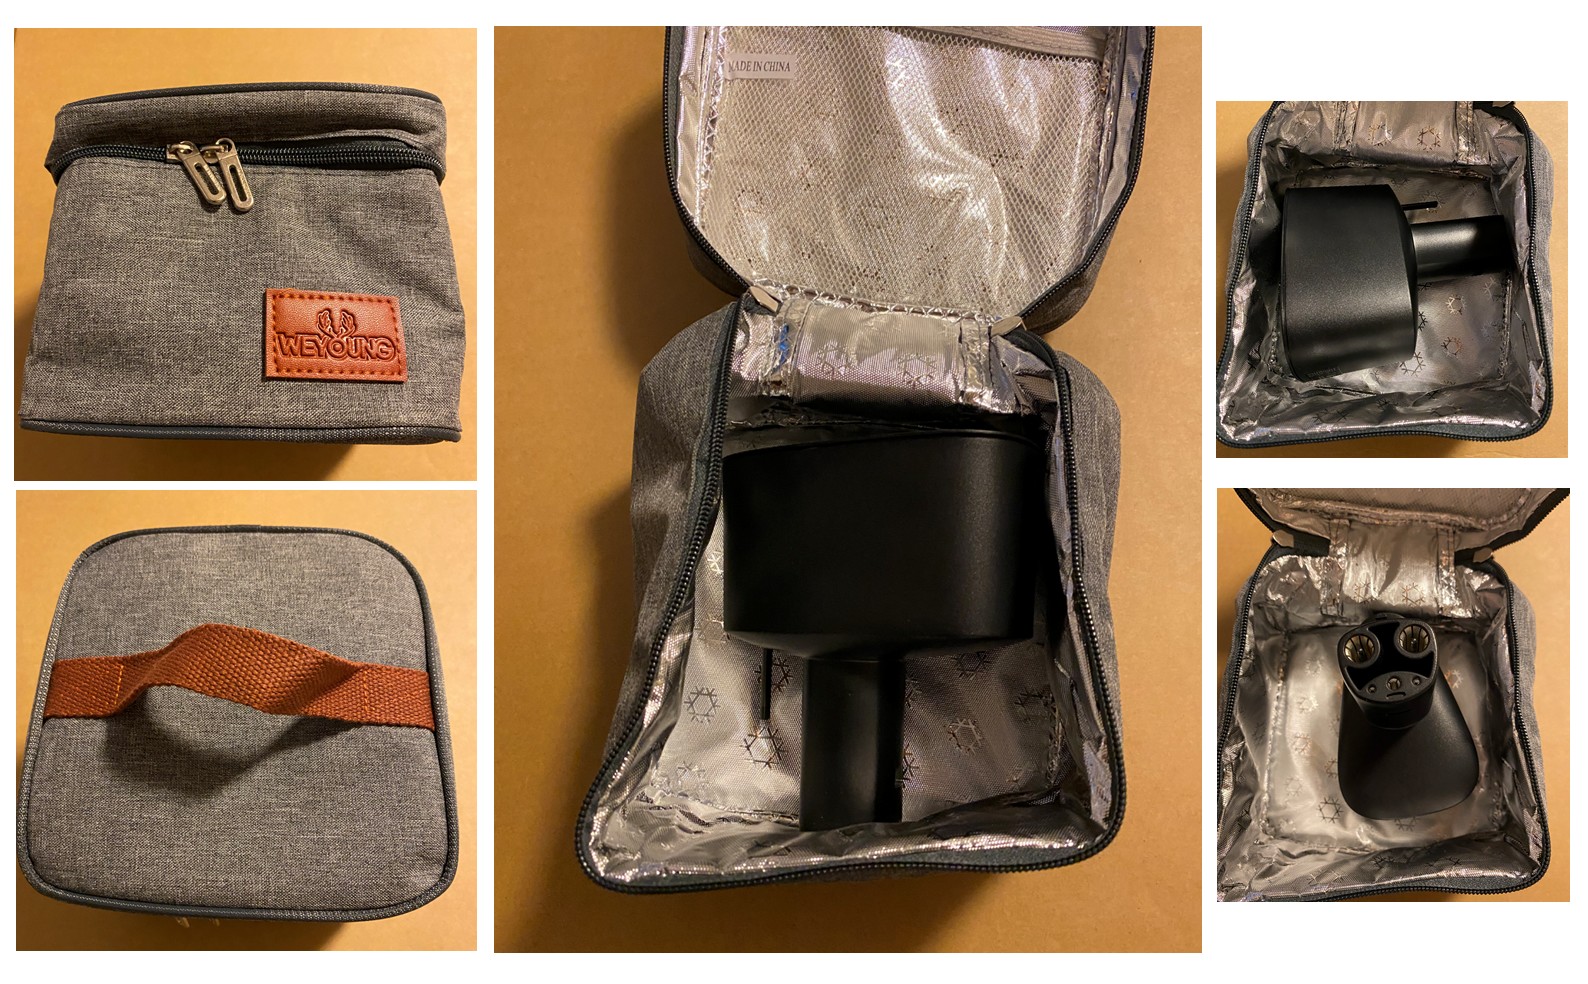 4. Weyoung Insulated Cooler